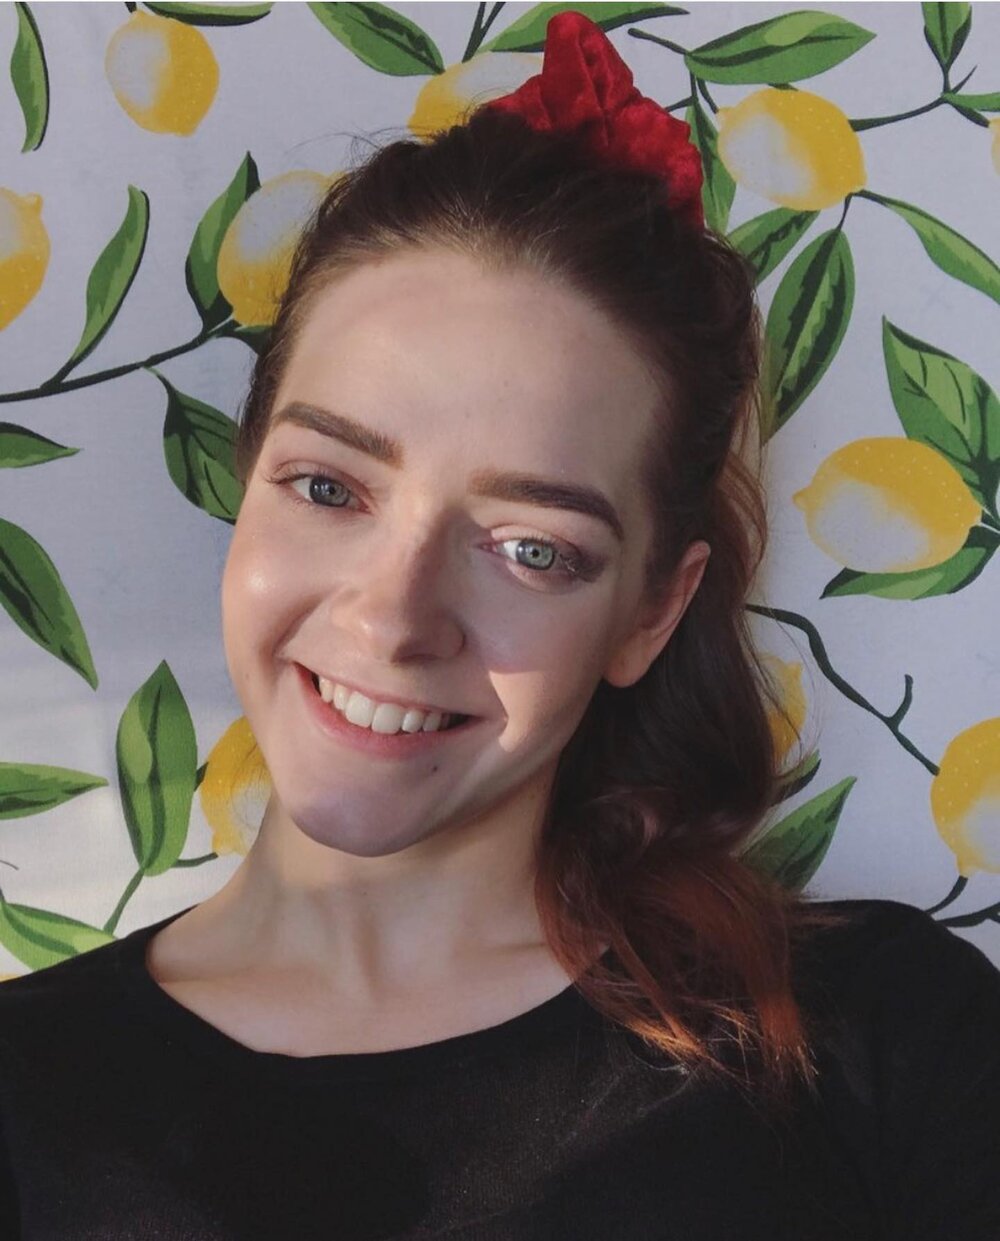 INTRODUCING SHYANNE BARKER: 🍋✨

&ldquo;Hi I&rsquo;m Shy and I am a mobile clinical aesthetician, and the CEO of Skin by Shy! I currently do not have any employees below myself. I started towards the end of December 2019 and have been active until Ma